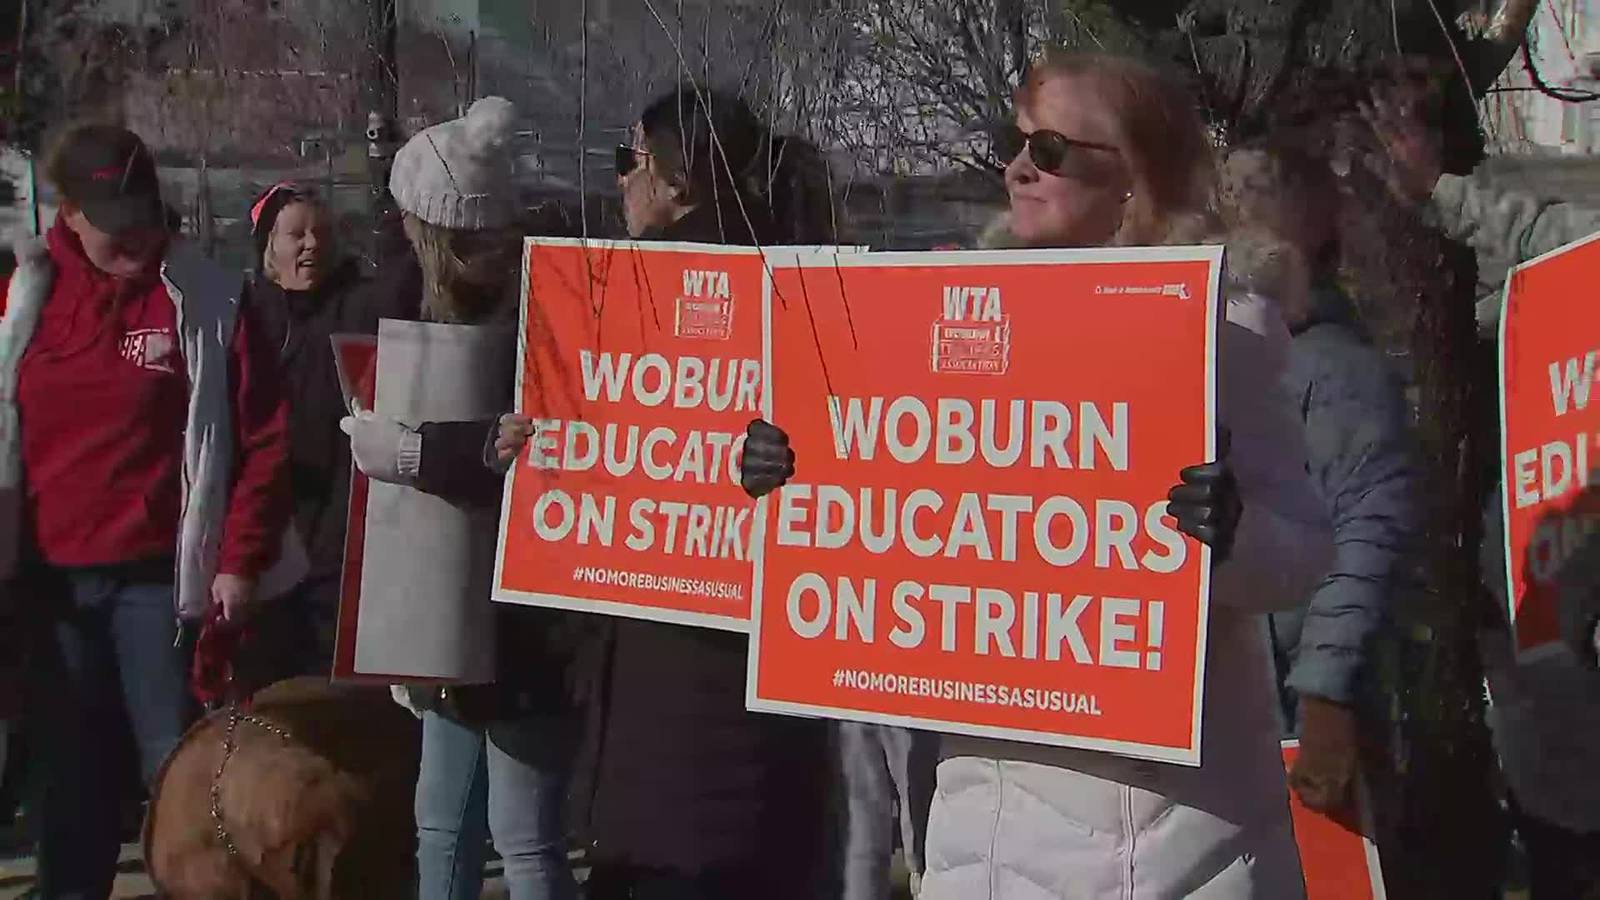 Woburn teachers to strike after negotiations end early Sunday night